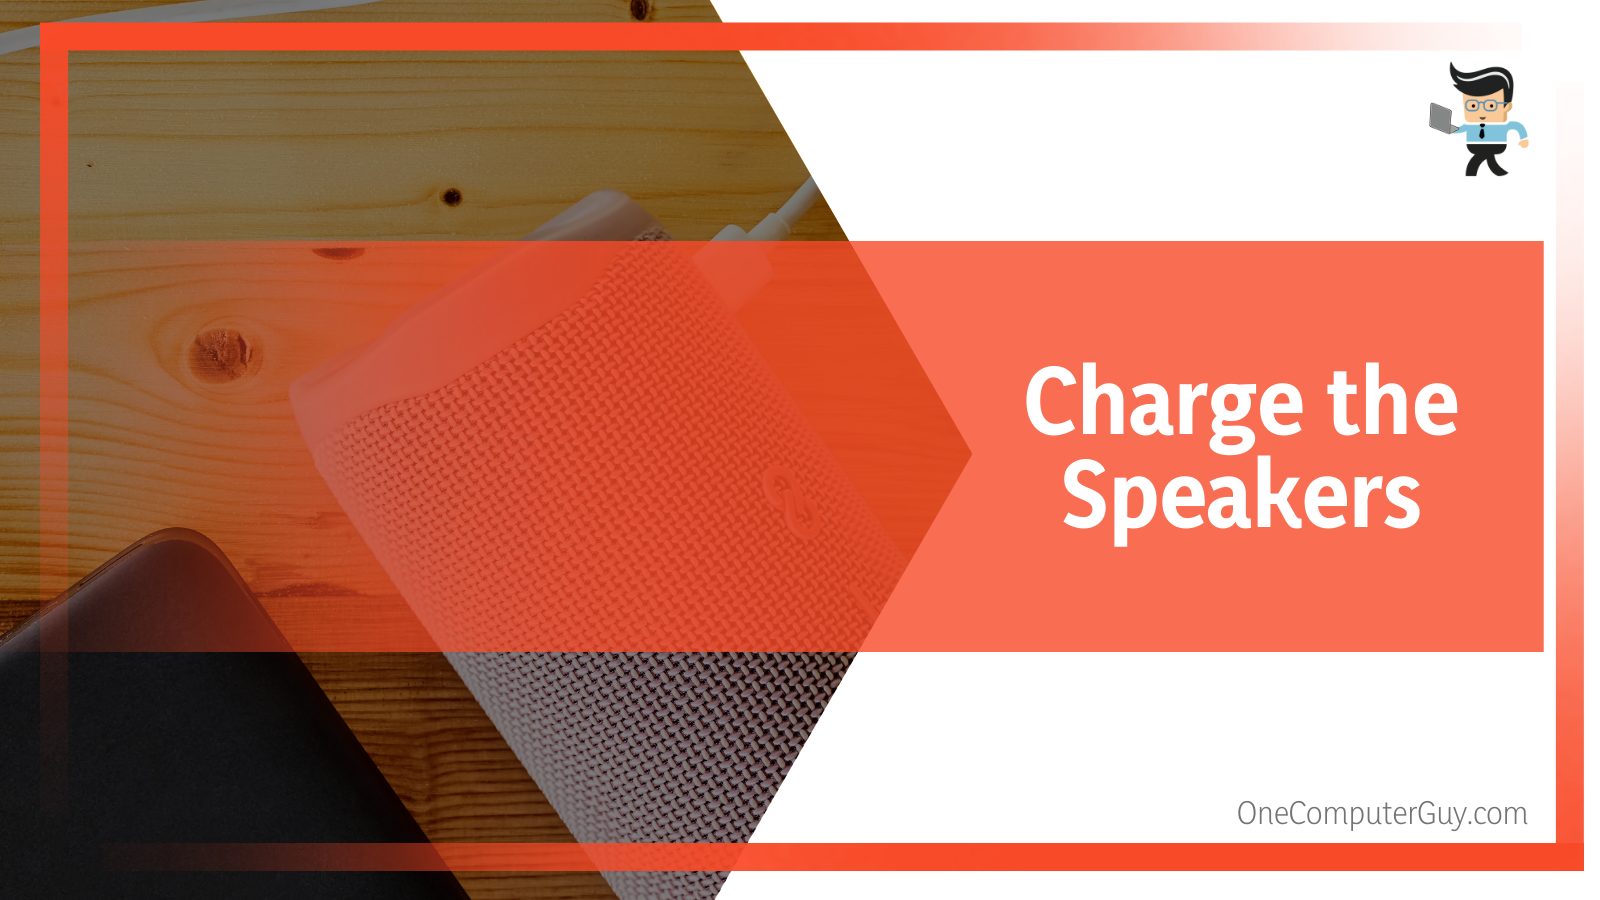 Charge the Speakers